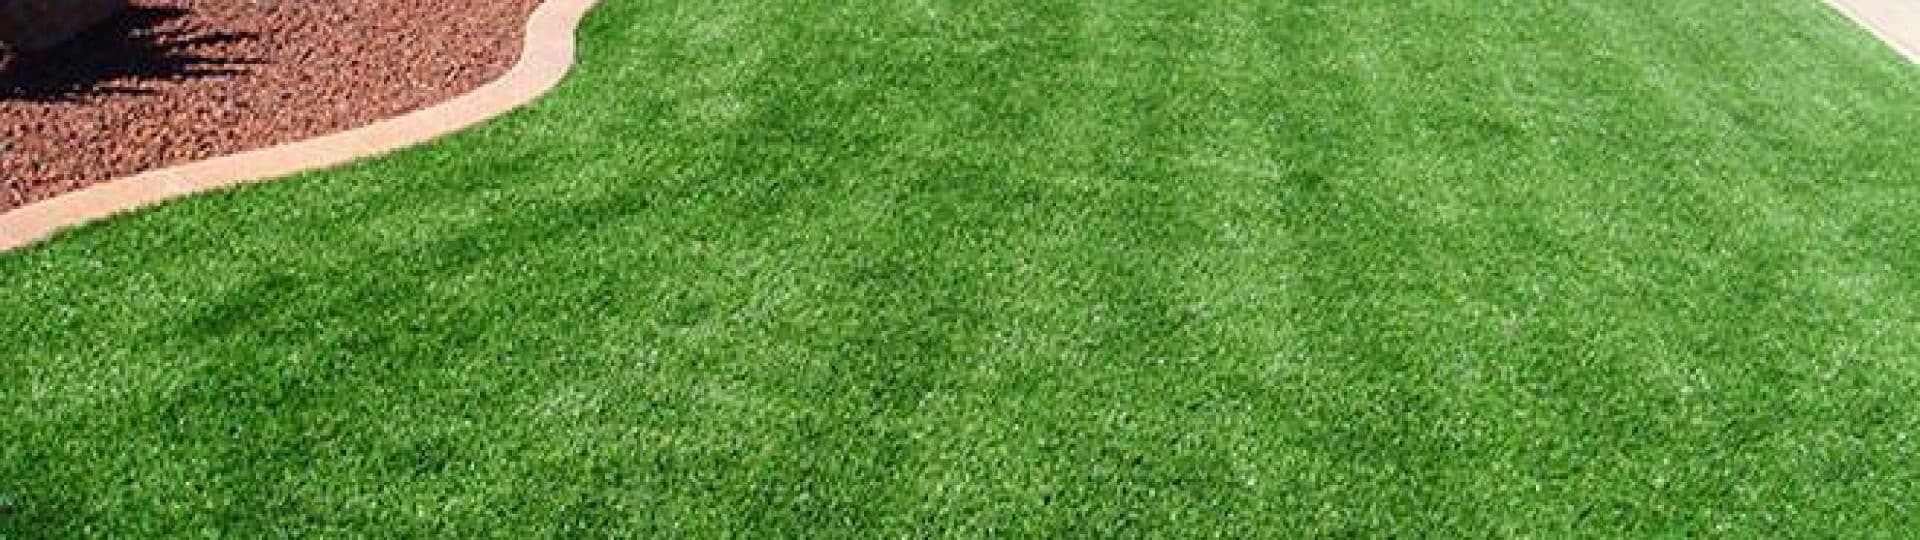 Artificial lawn with curved edge